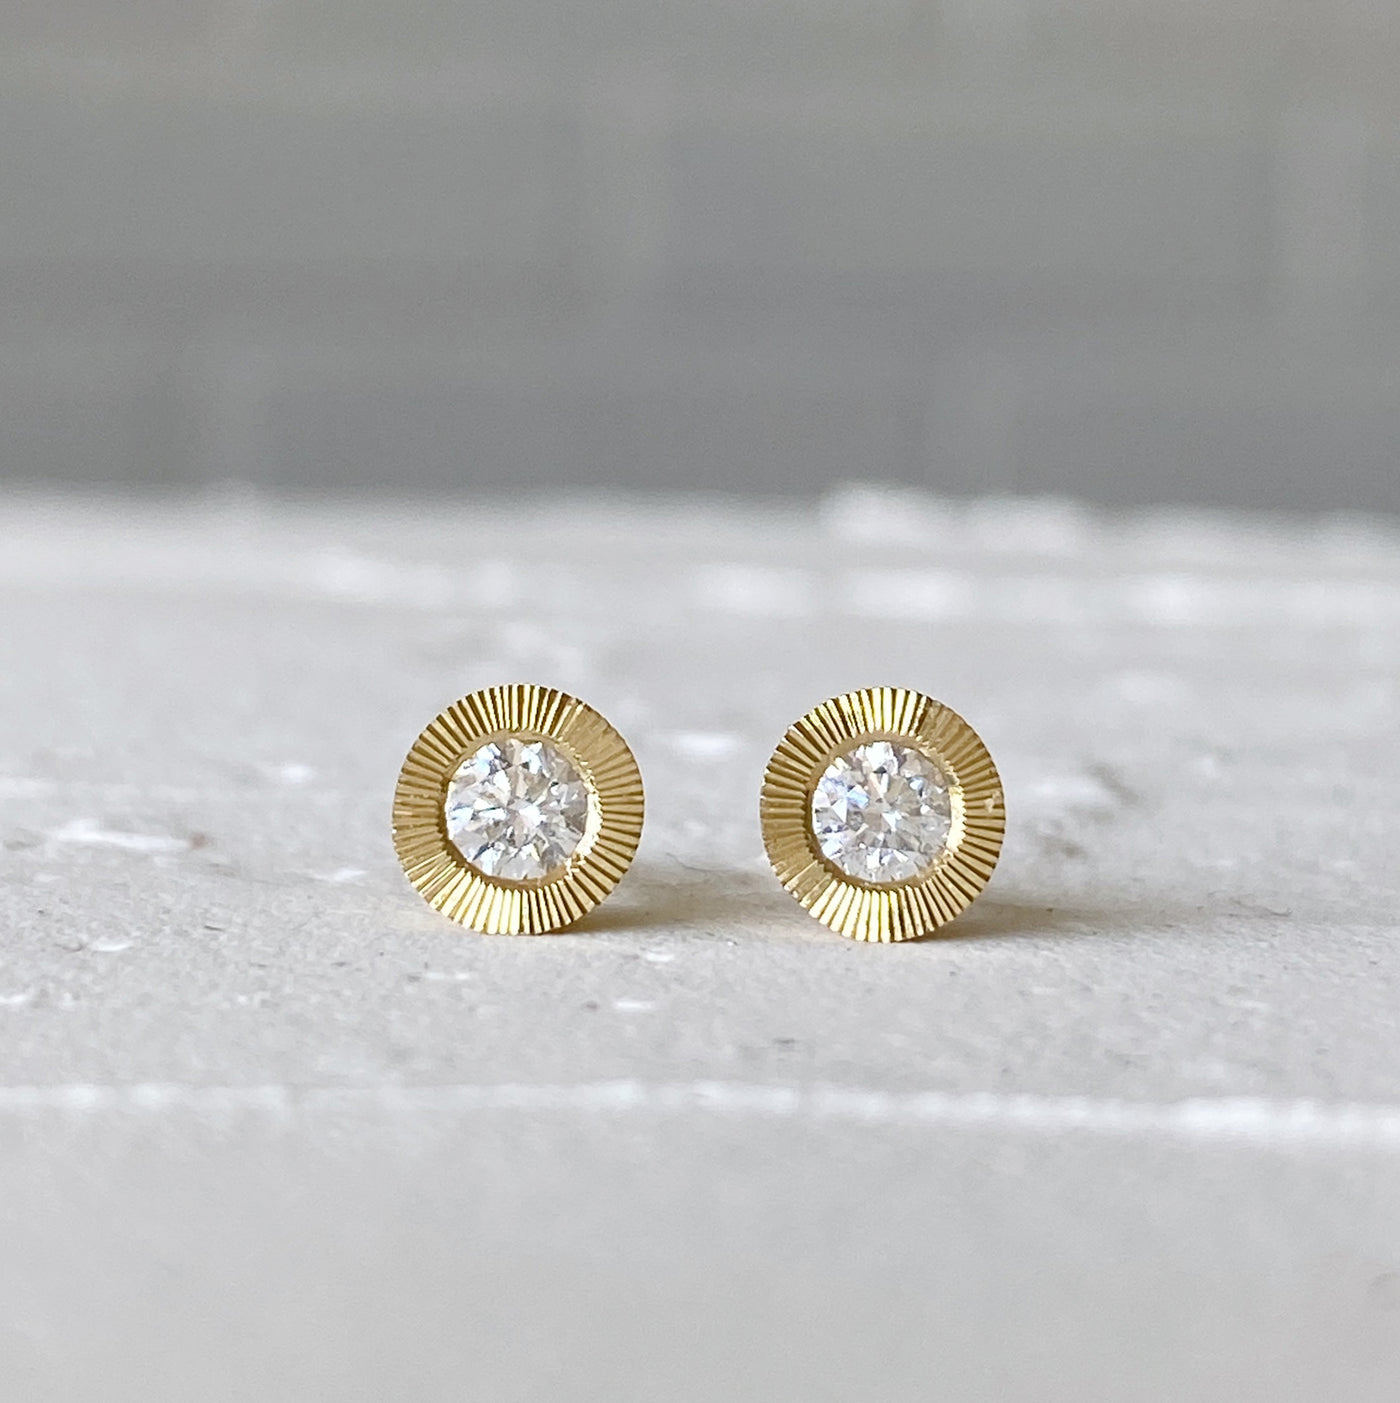 Large Diamond Aurora stud earring in yellow gold with an engraved halo border in natural light